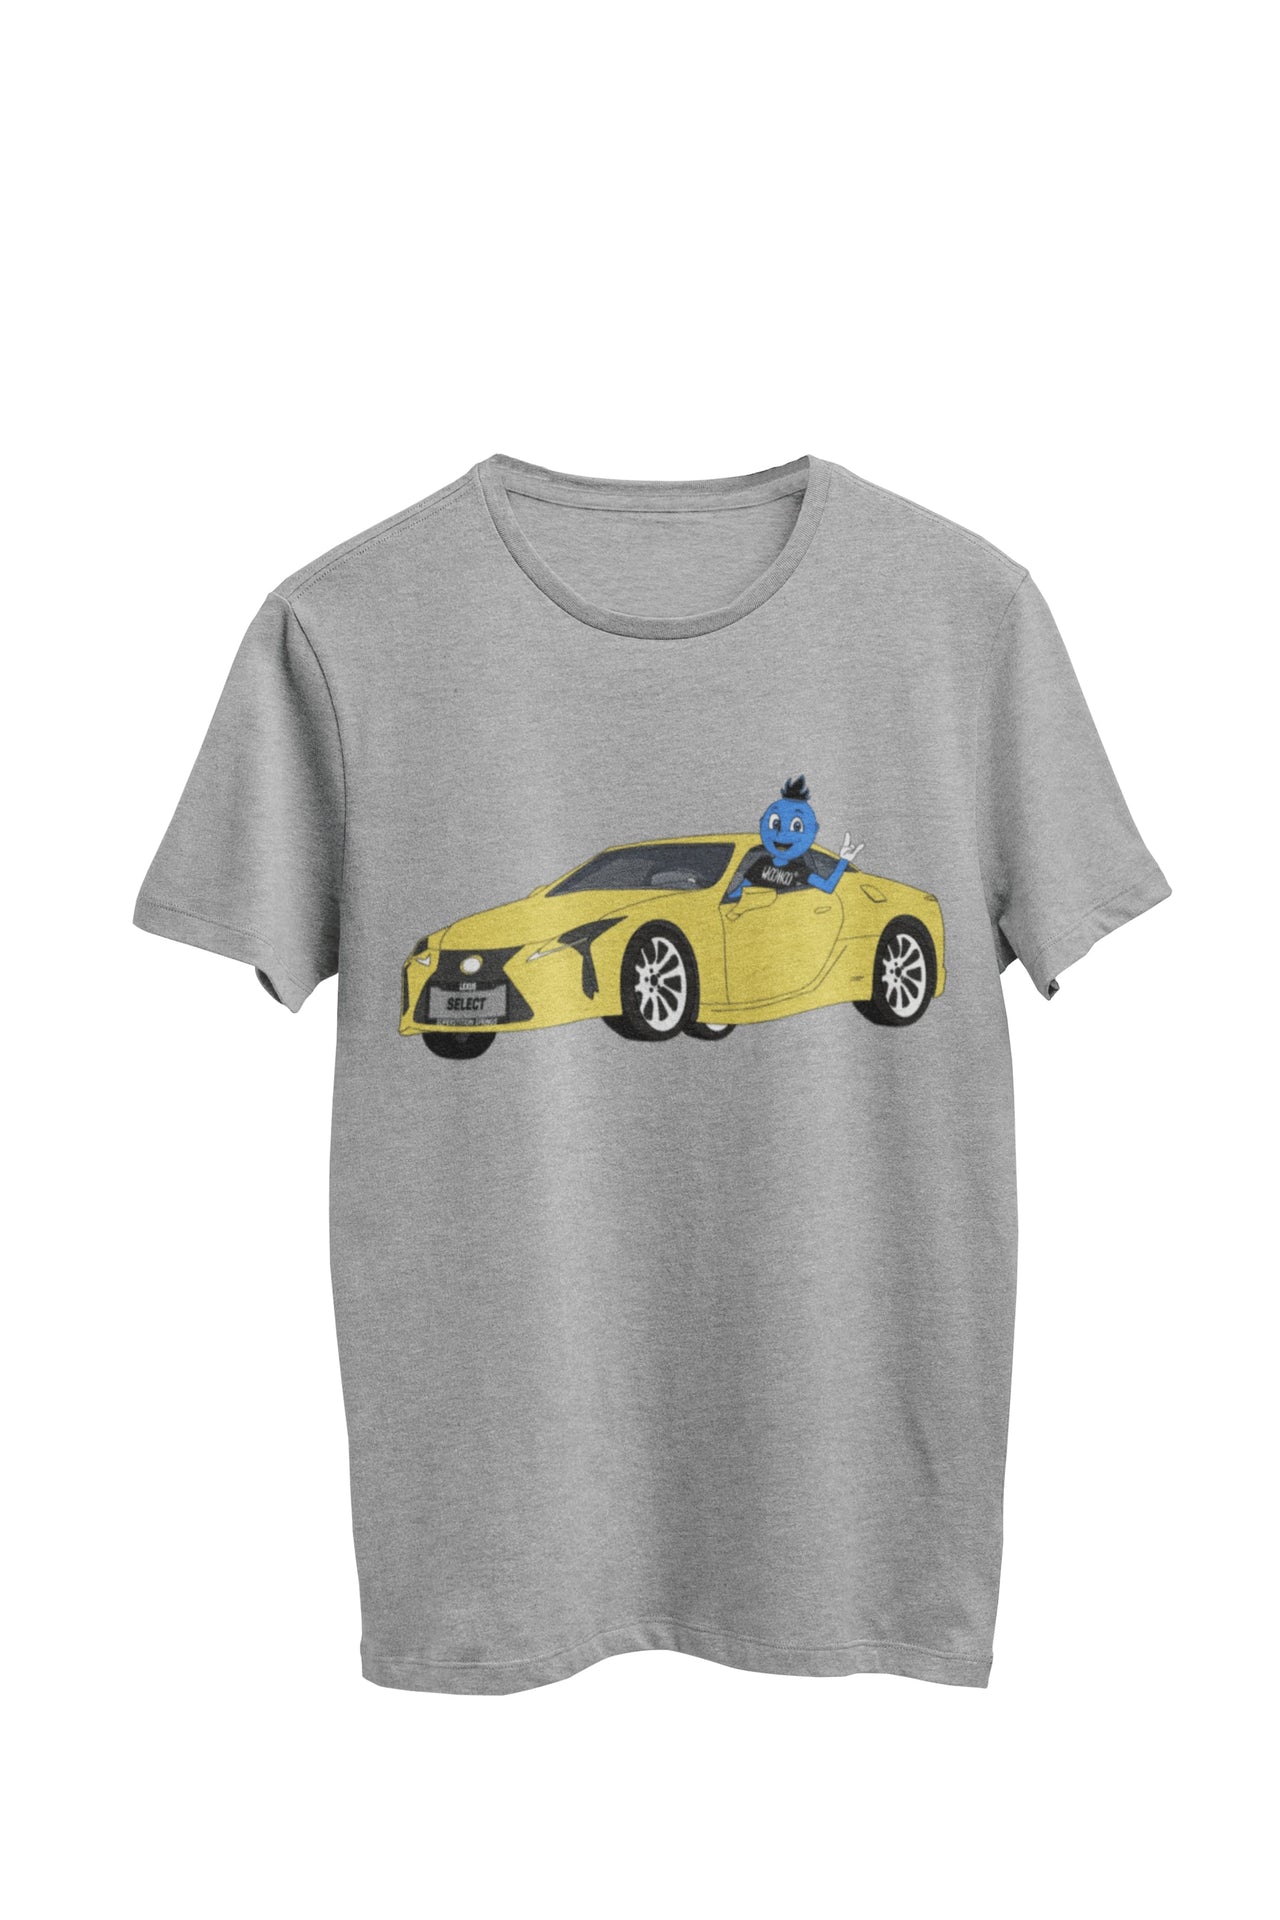 WooHooBerry cruising in a vibrant yellow sports car, extending a wave out of the window. The license plate proudly reads 'WooHoo.' The gray T-shirt resonates with the dynamic and spirited scene.